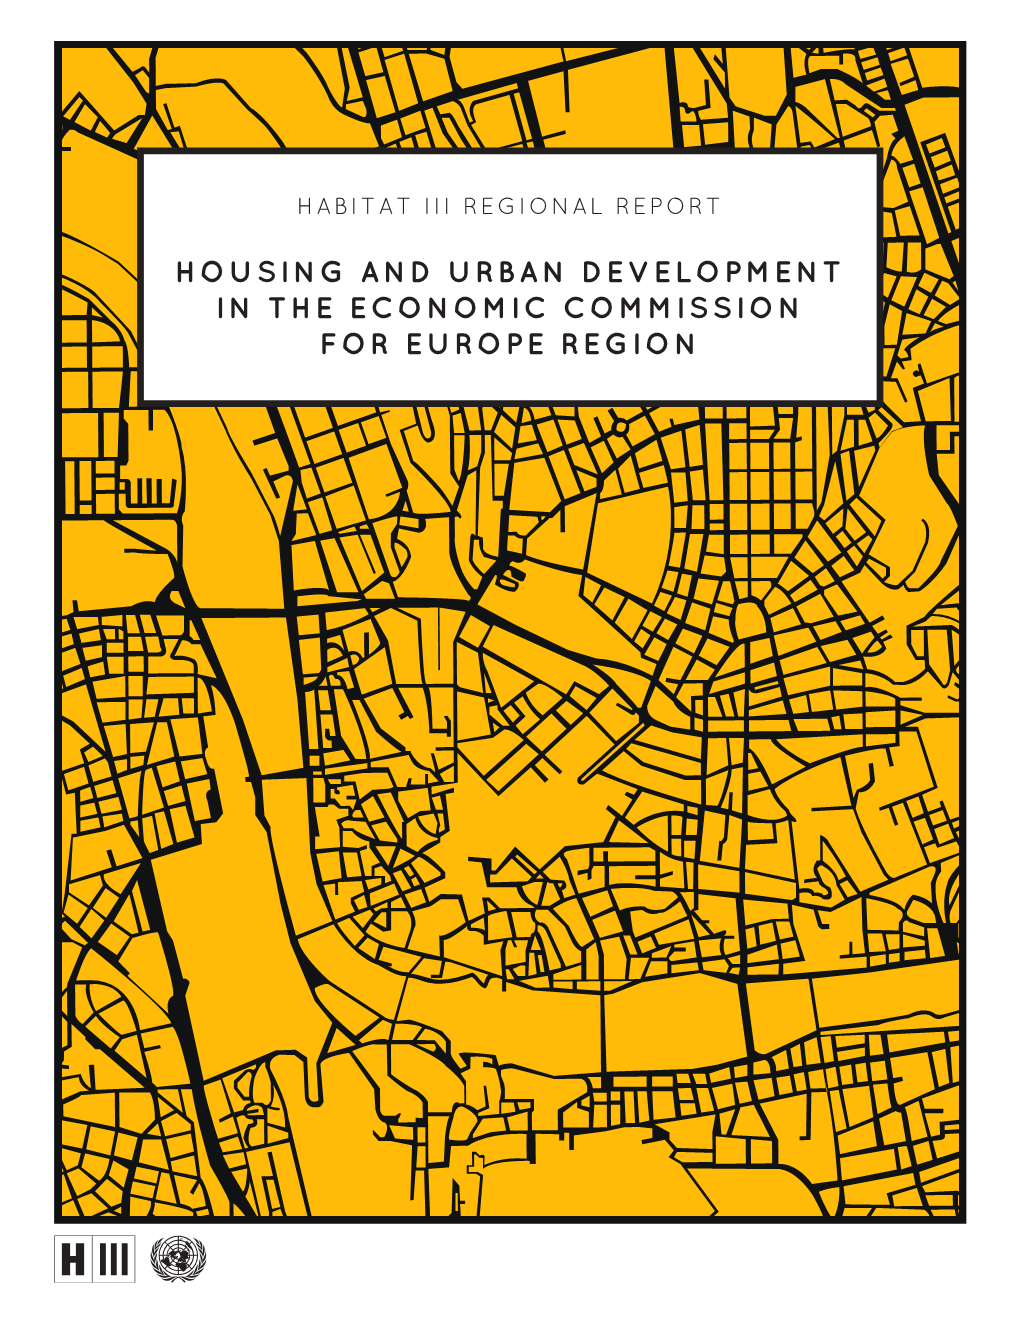 Housing and Urban Development in the Economic Commission for Europe Region